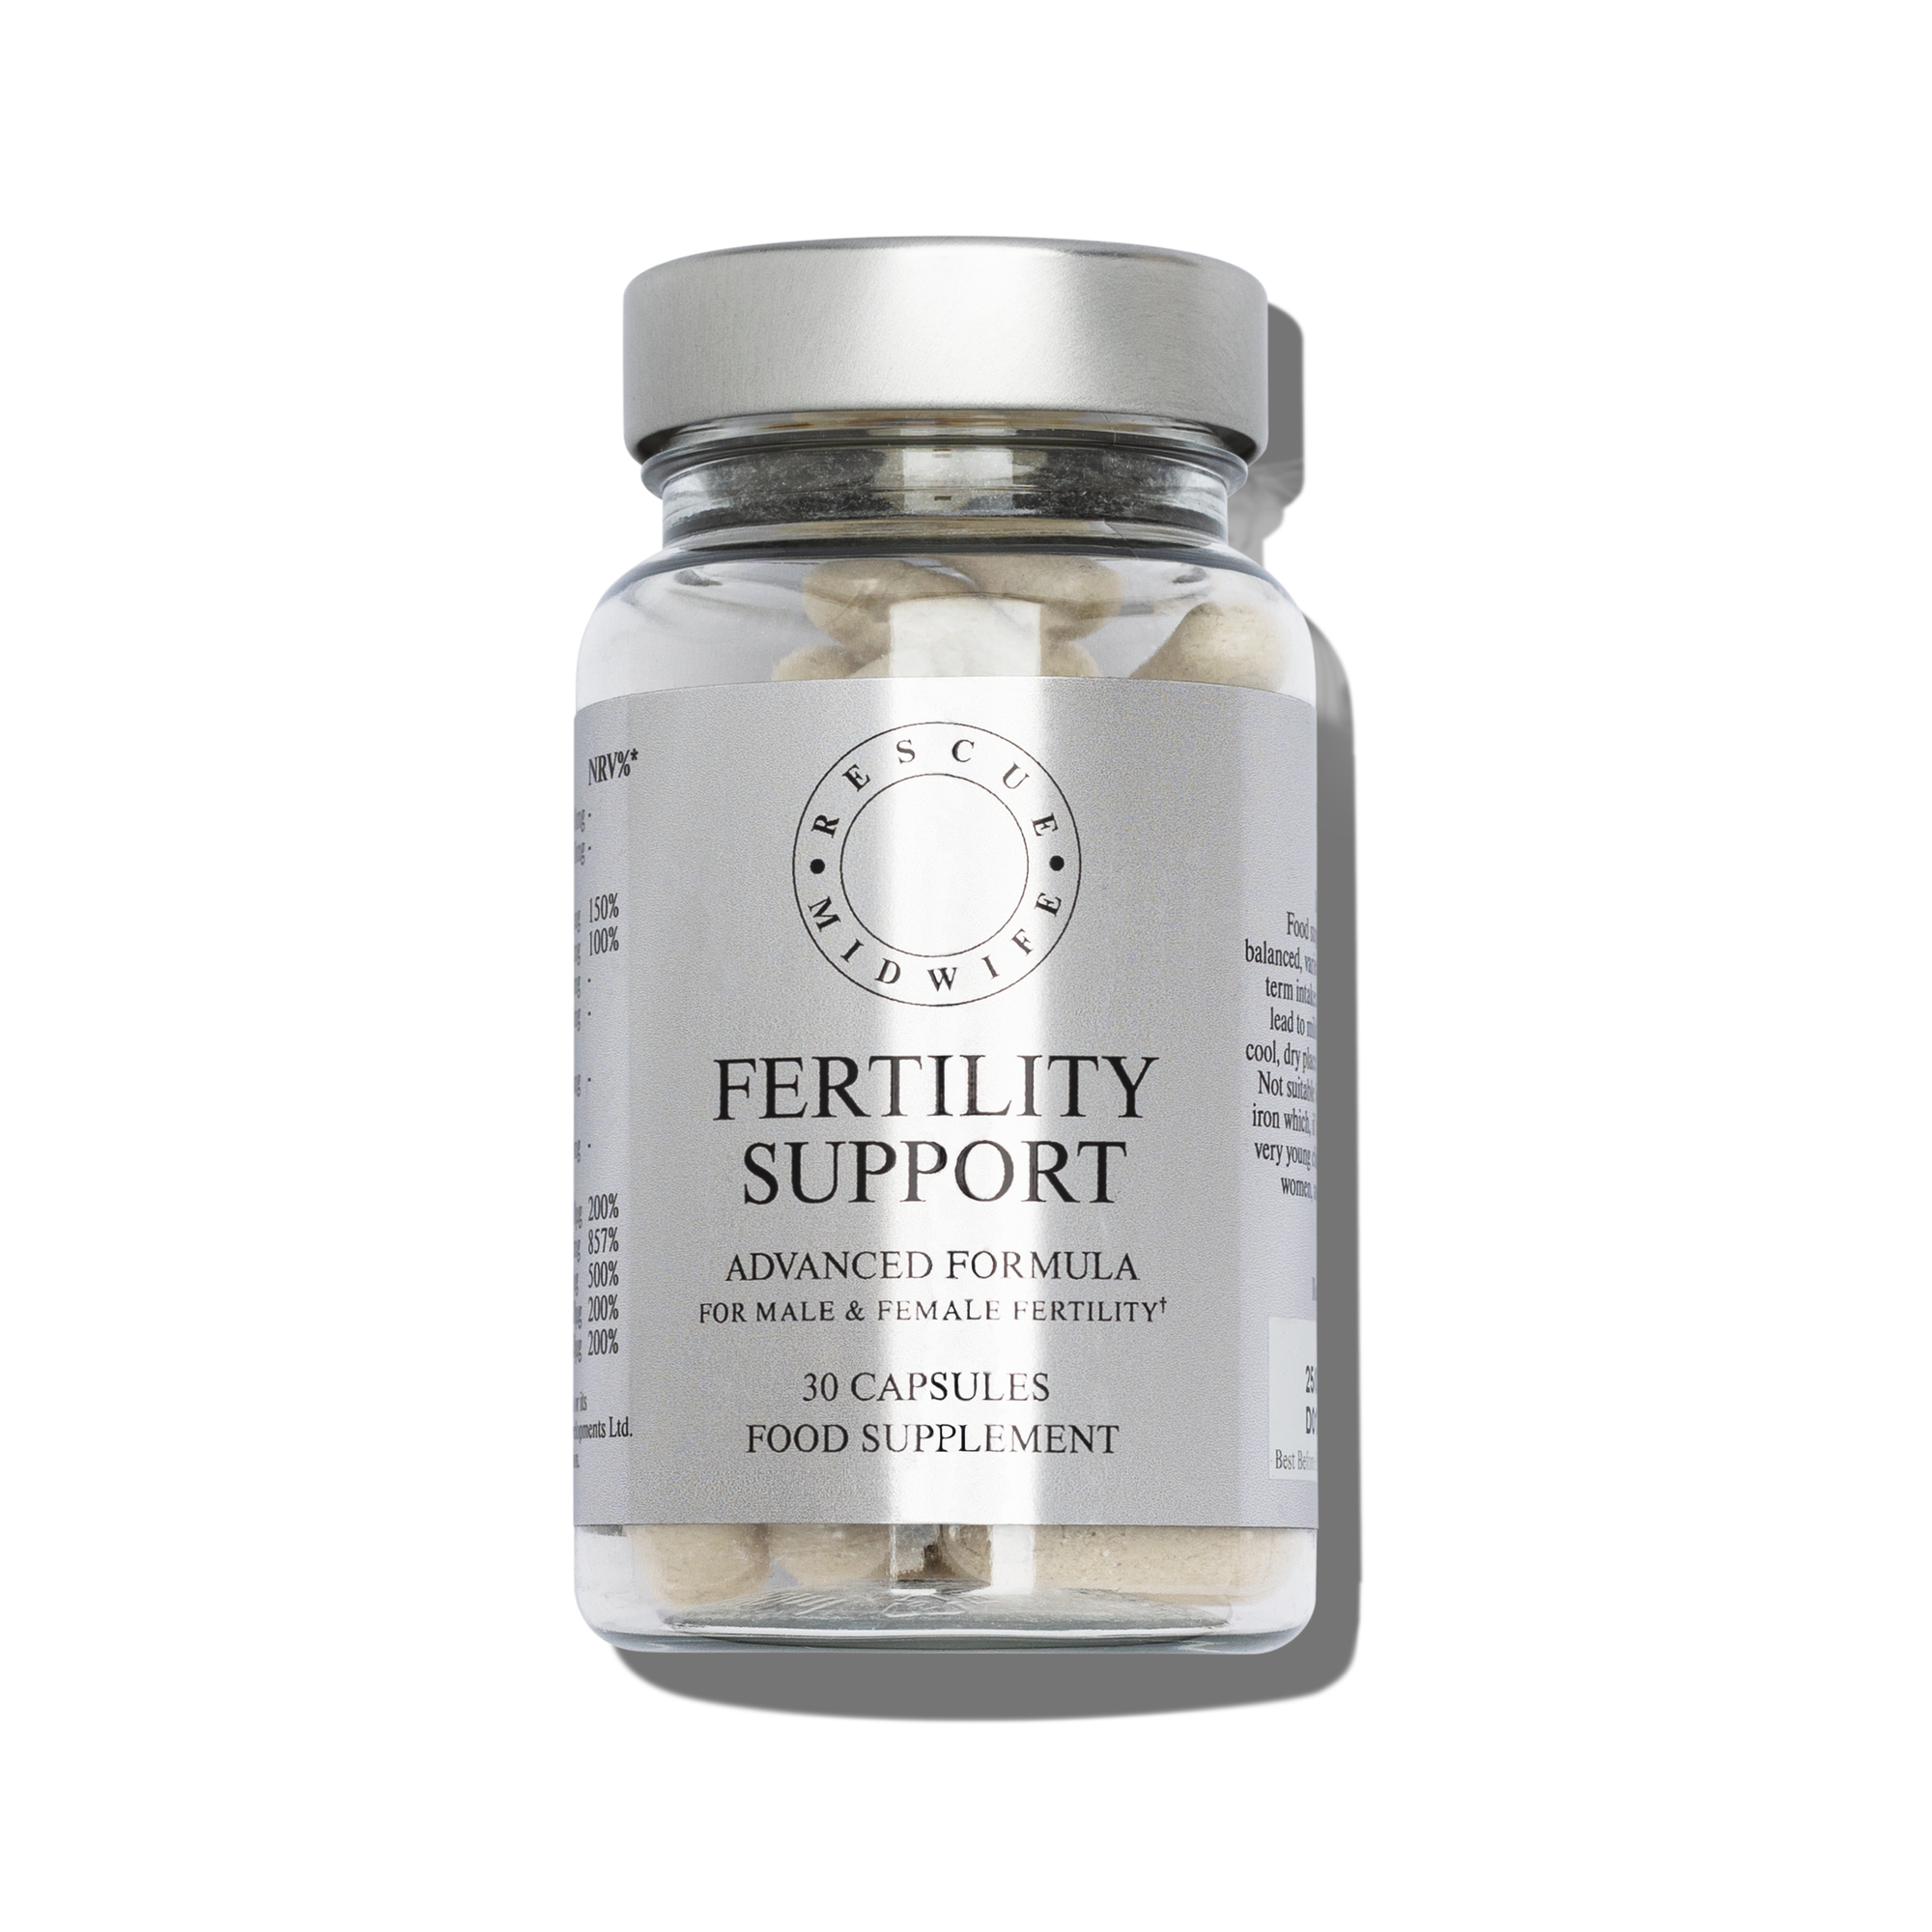 Fertility Supplement - 1 MONTH SUPPLY FOR 1 PERSON